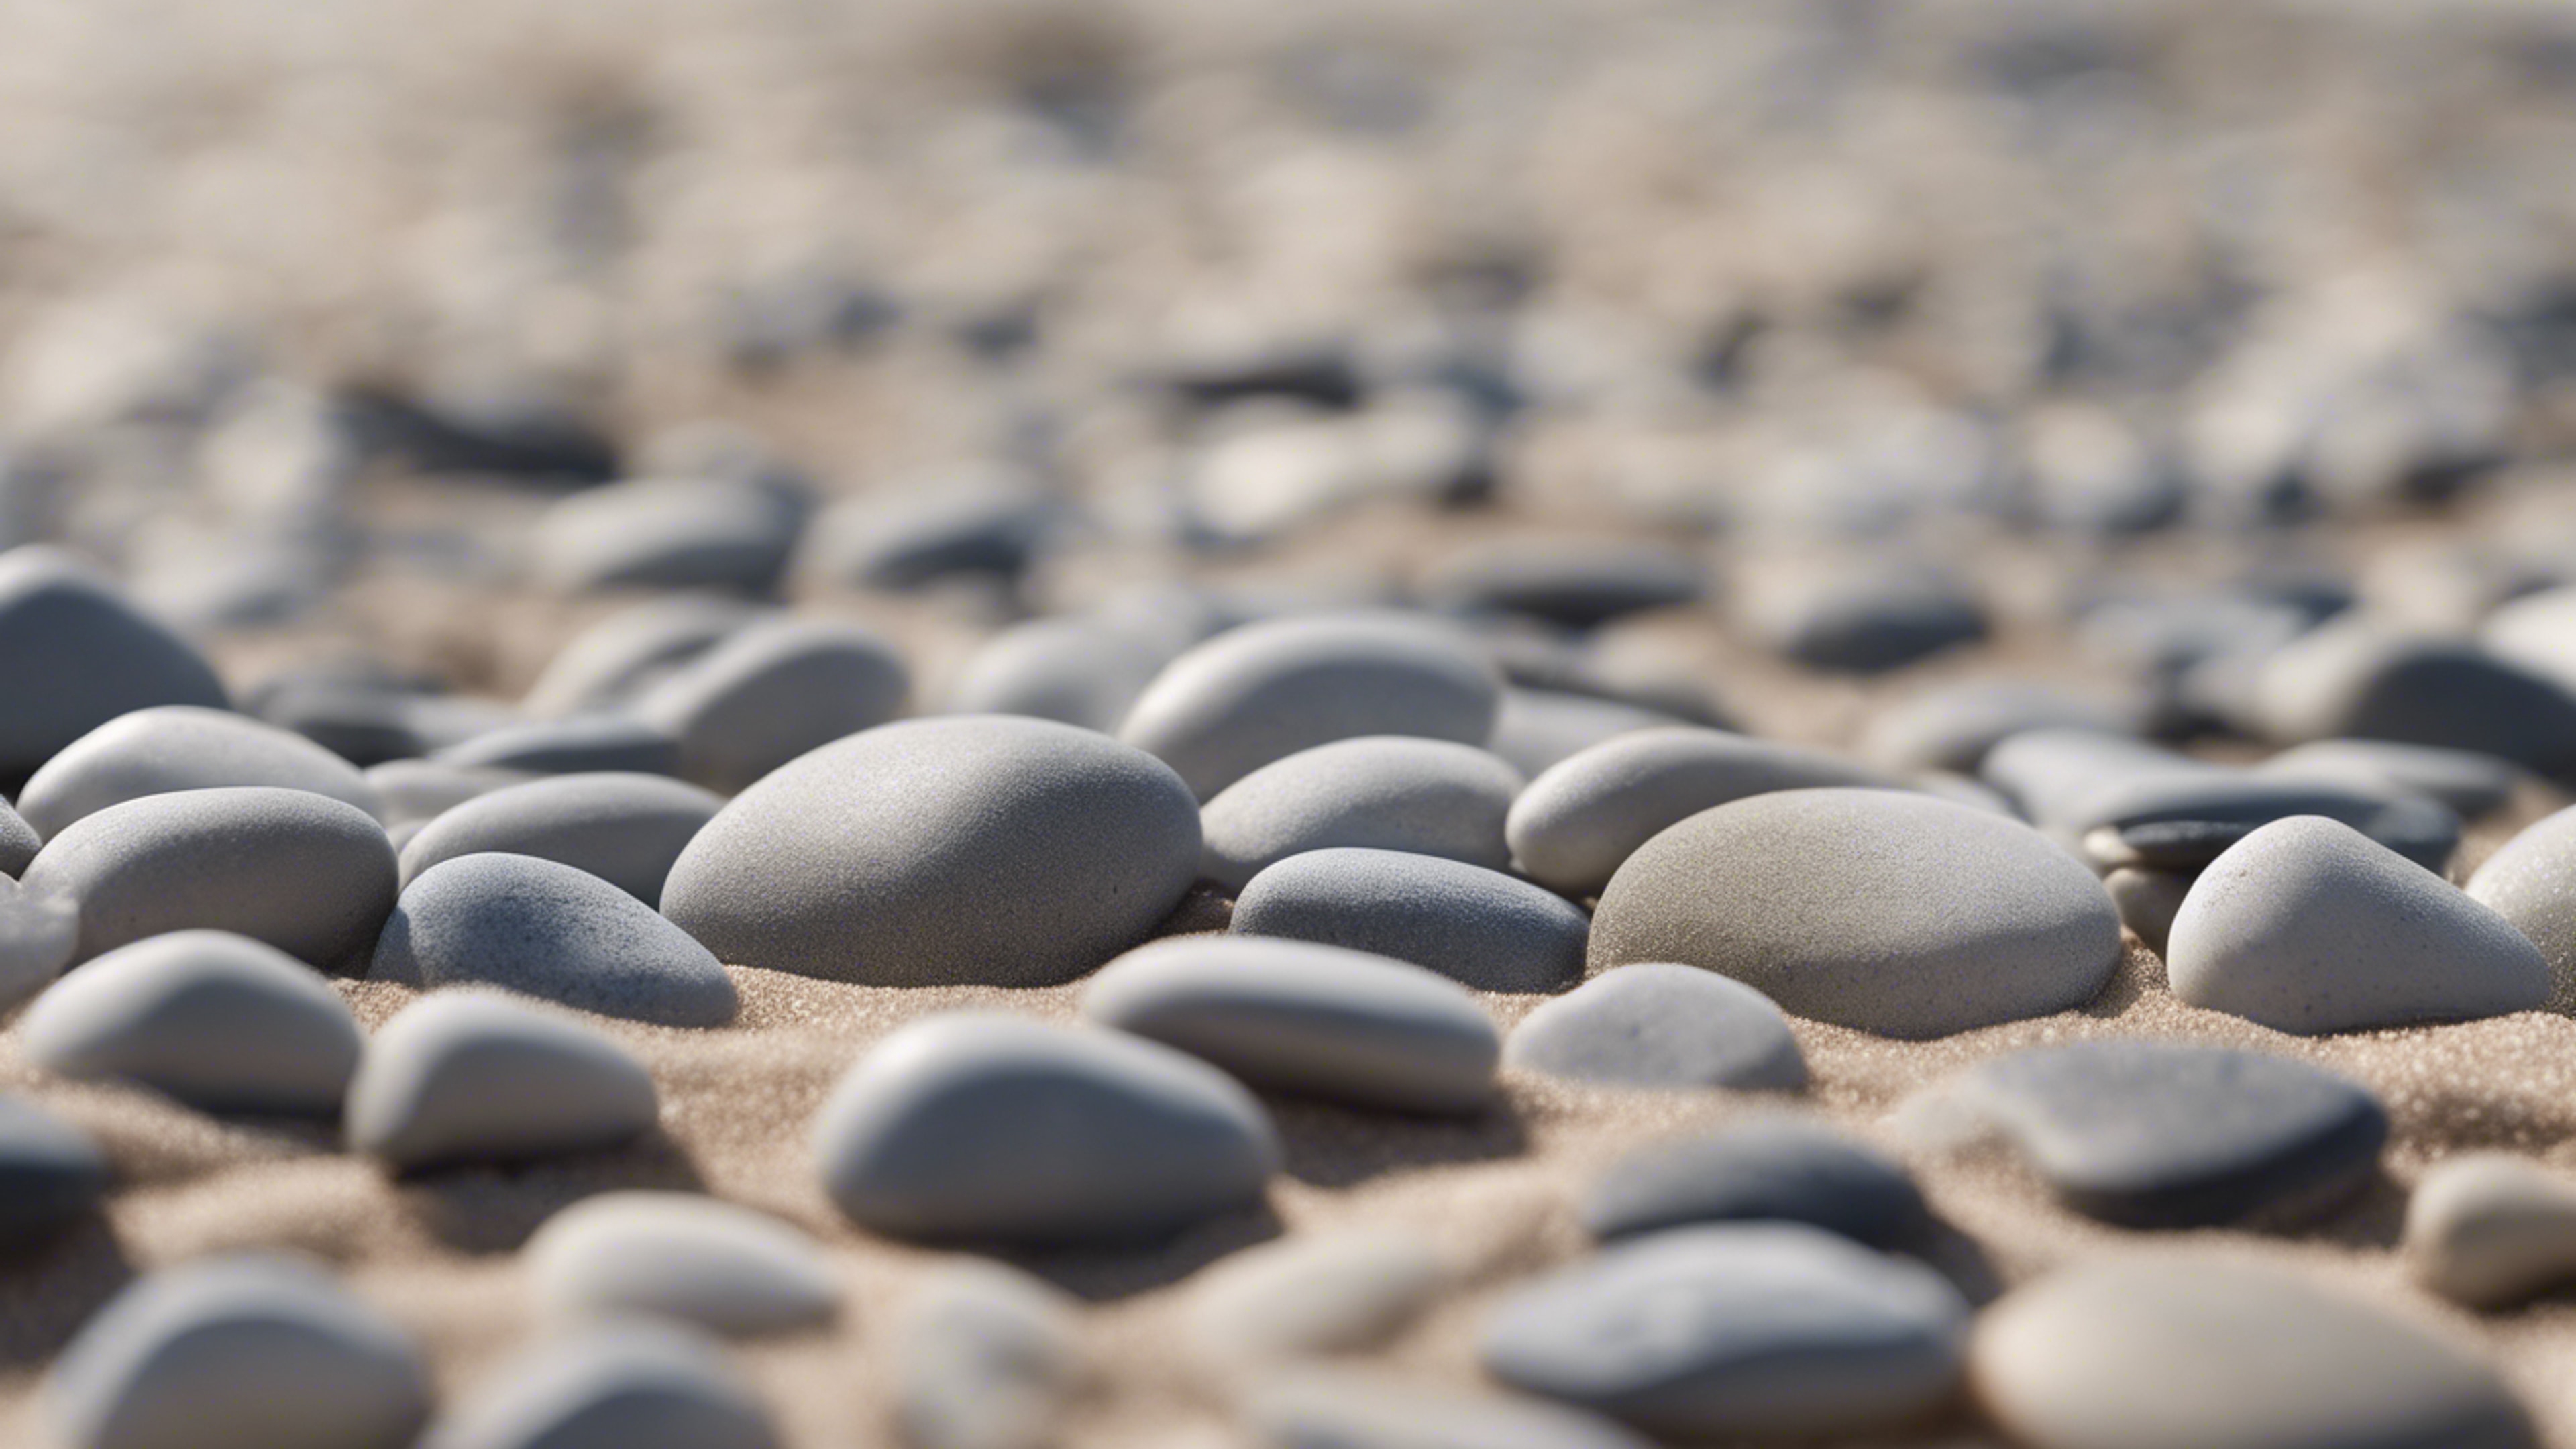 A collection of light gray pebbles arranged in an intricate pattern on a sandy beach. ផ្ទាំង​រូបភាព[7440af21c01a4a2abeaf]